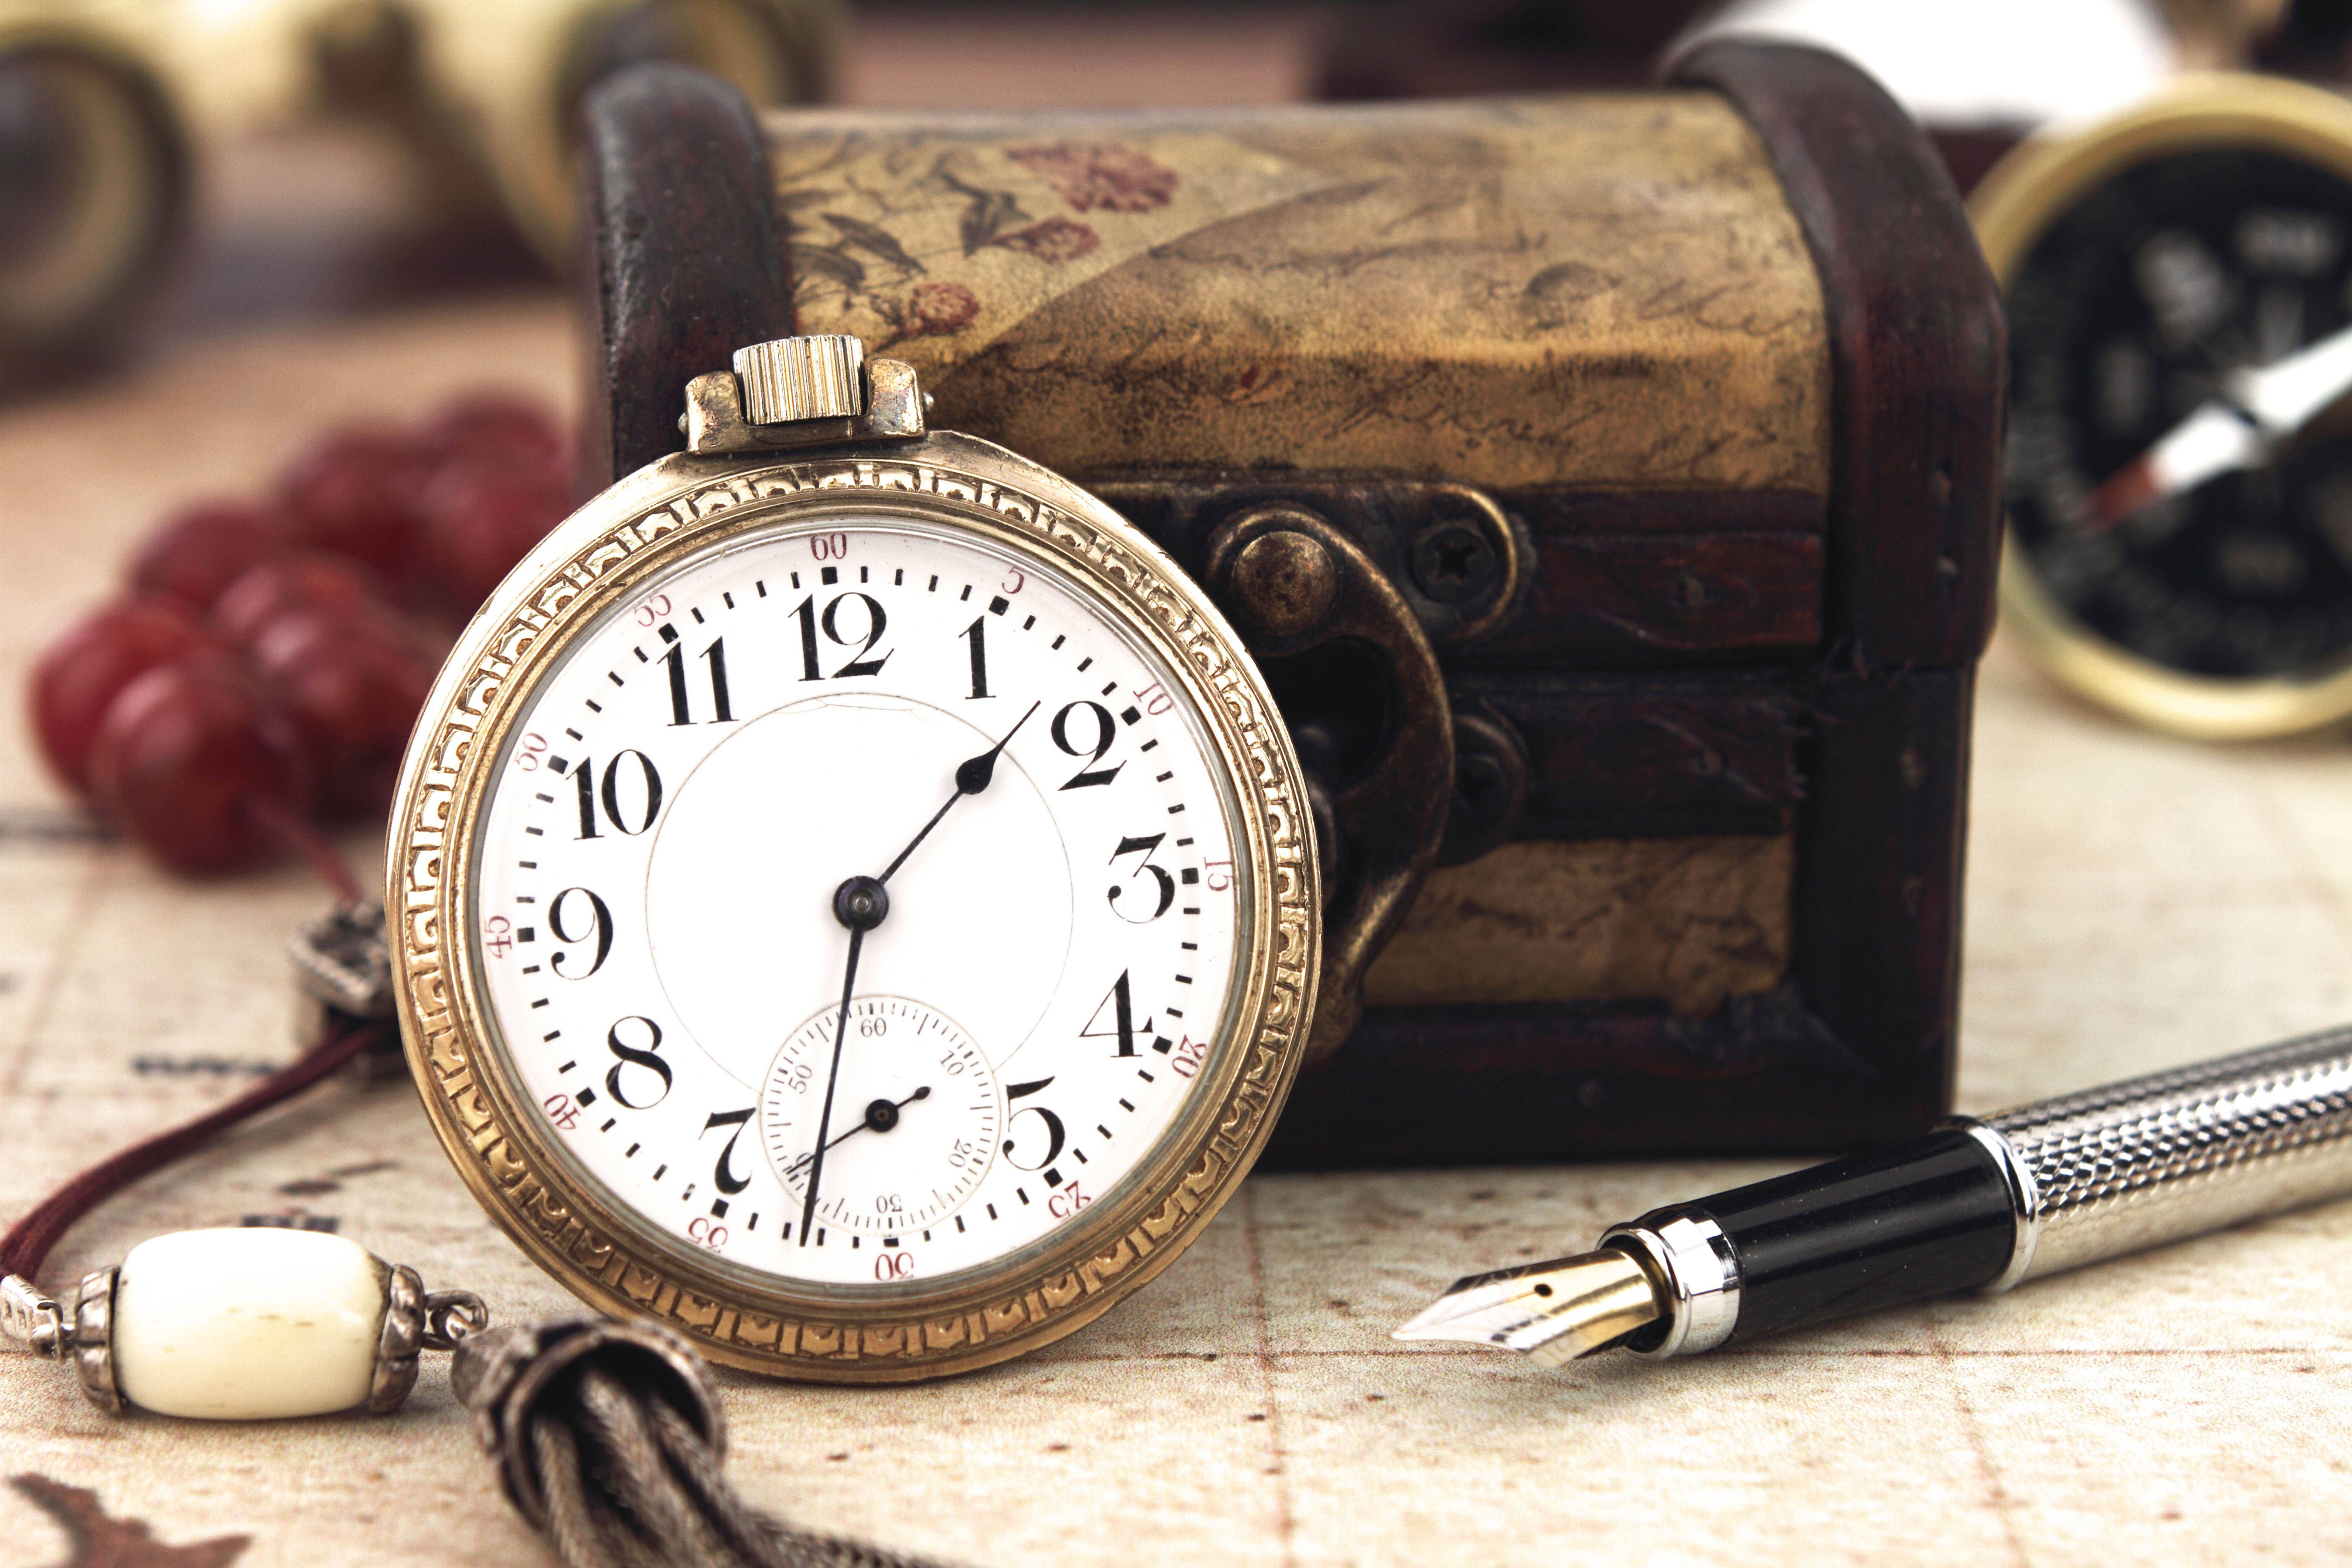 Pocket watch and box wallpaper and image, picture